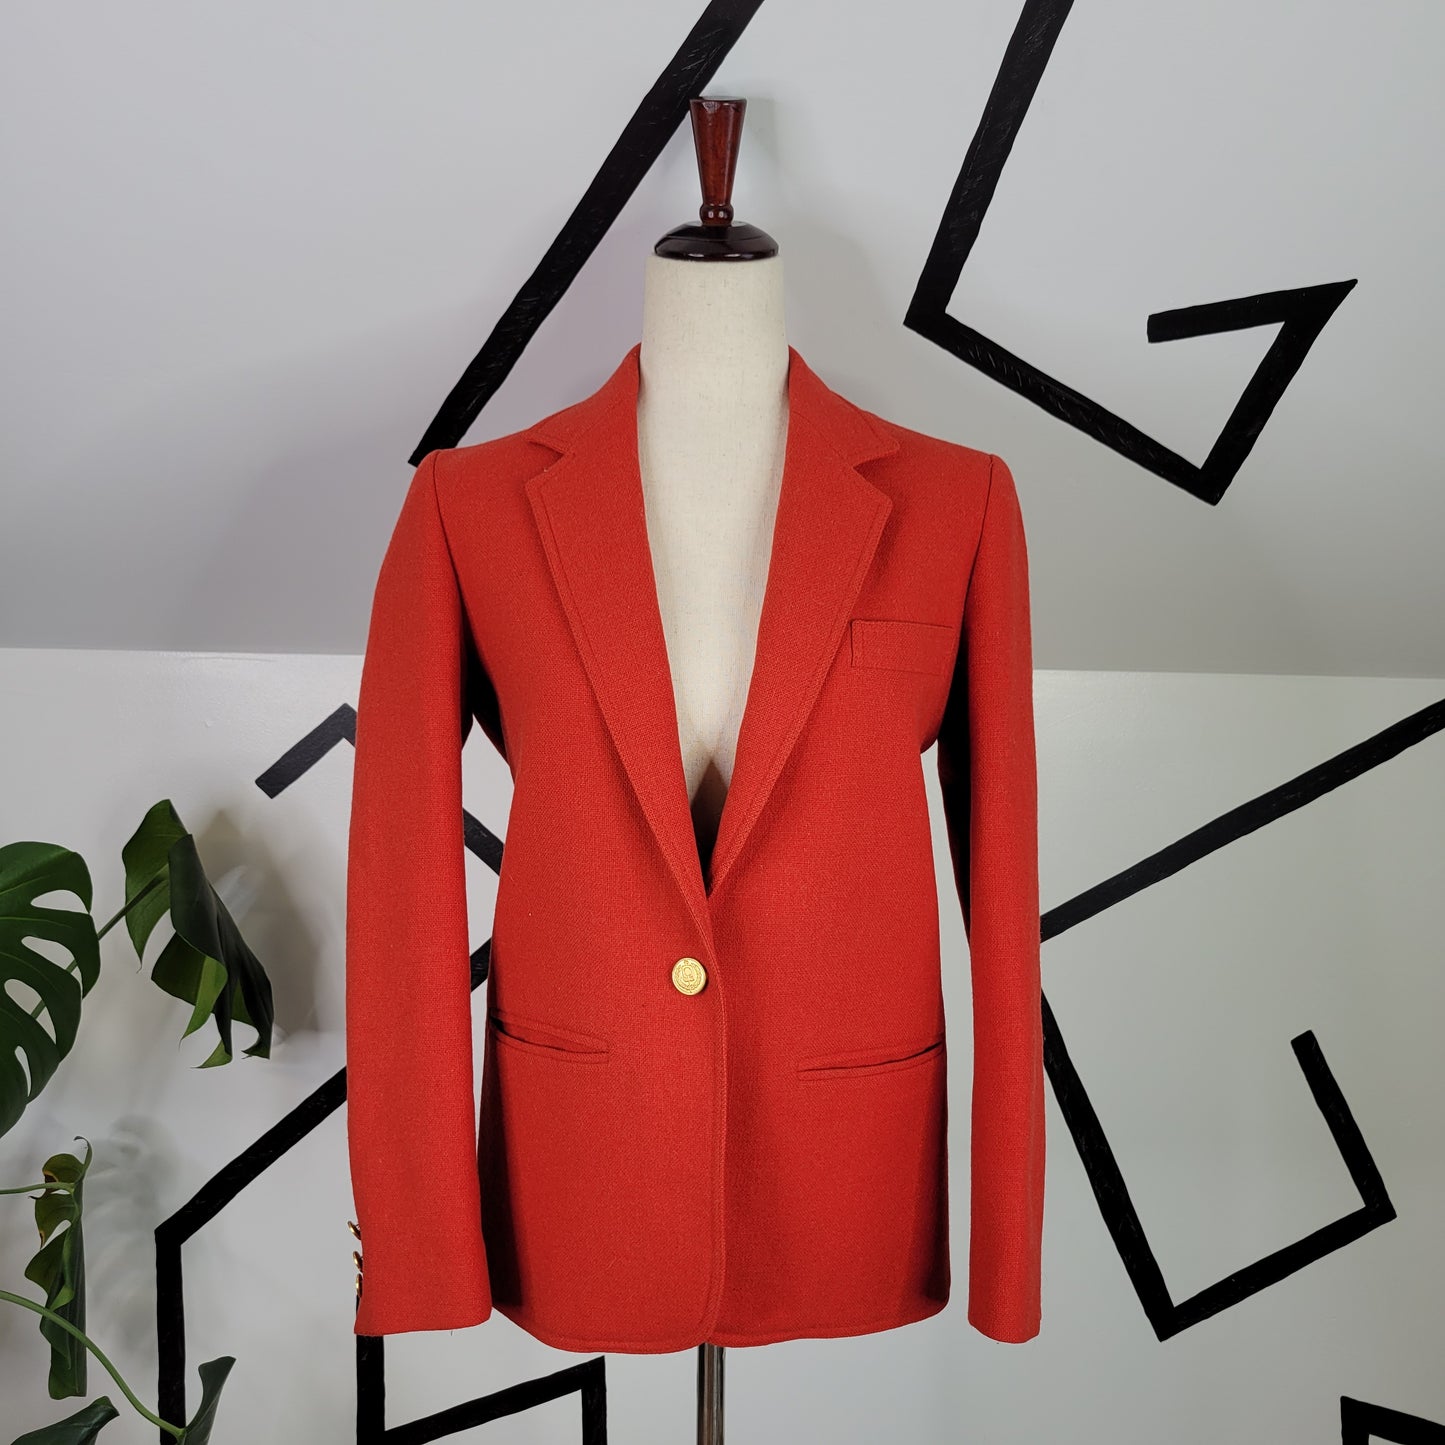 Nordstrom 70s Roth Le Cover Sport Made in Poland Vintage Wool Blazer - 10